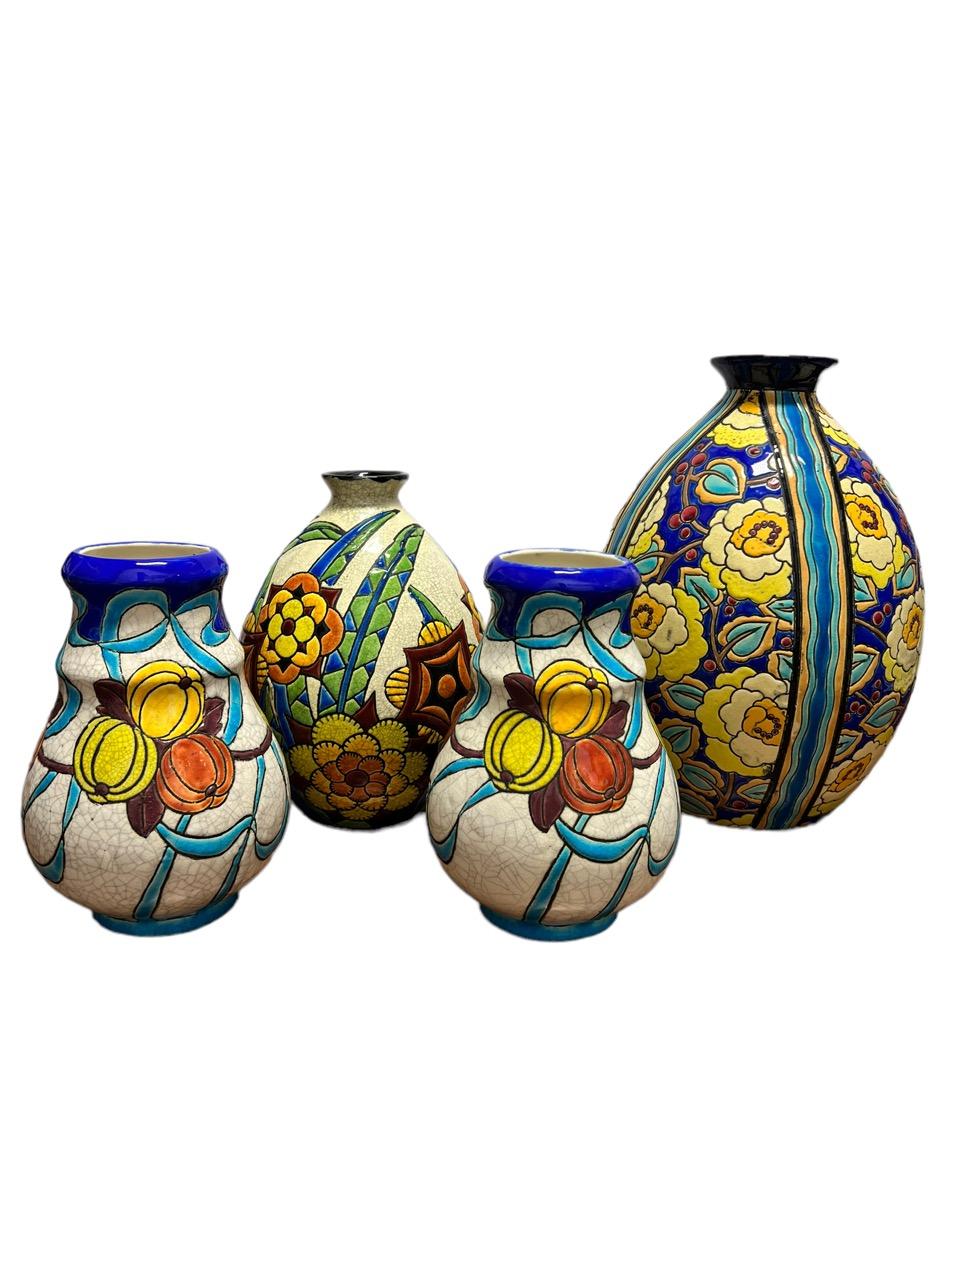 Presenting a captivating quartet of 1920s floral vases, masterfully crafted by the renowned artist Charles Catteau (1880-1966) in glazed earthenware. Each of these exquisite vases bears its own unique number and is adorned with markings, some